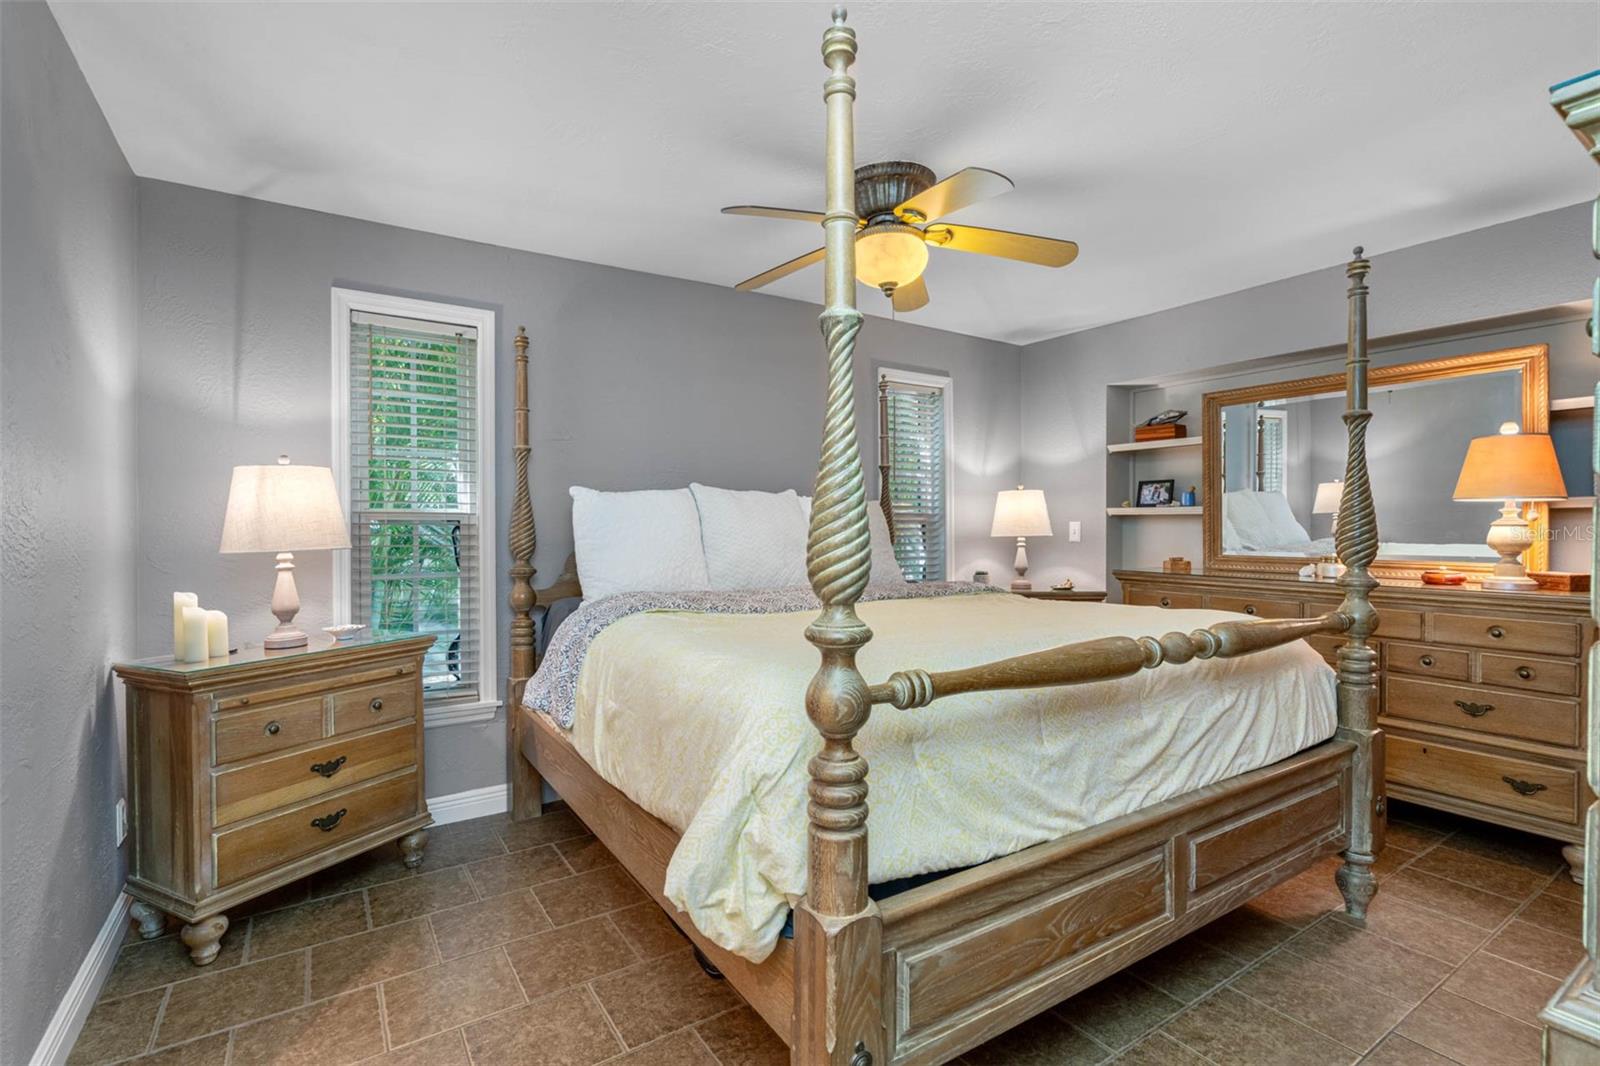 Soothing sleep, stunning views: Your bedroom sanctuary by the wate